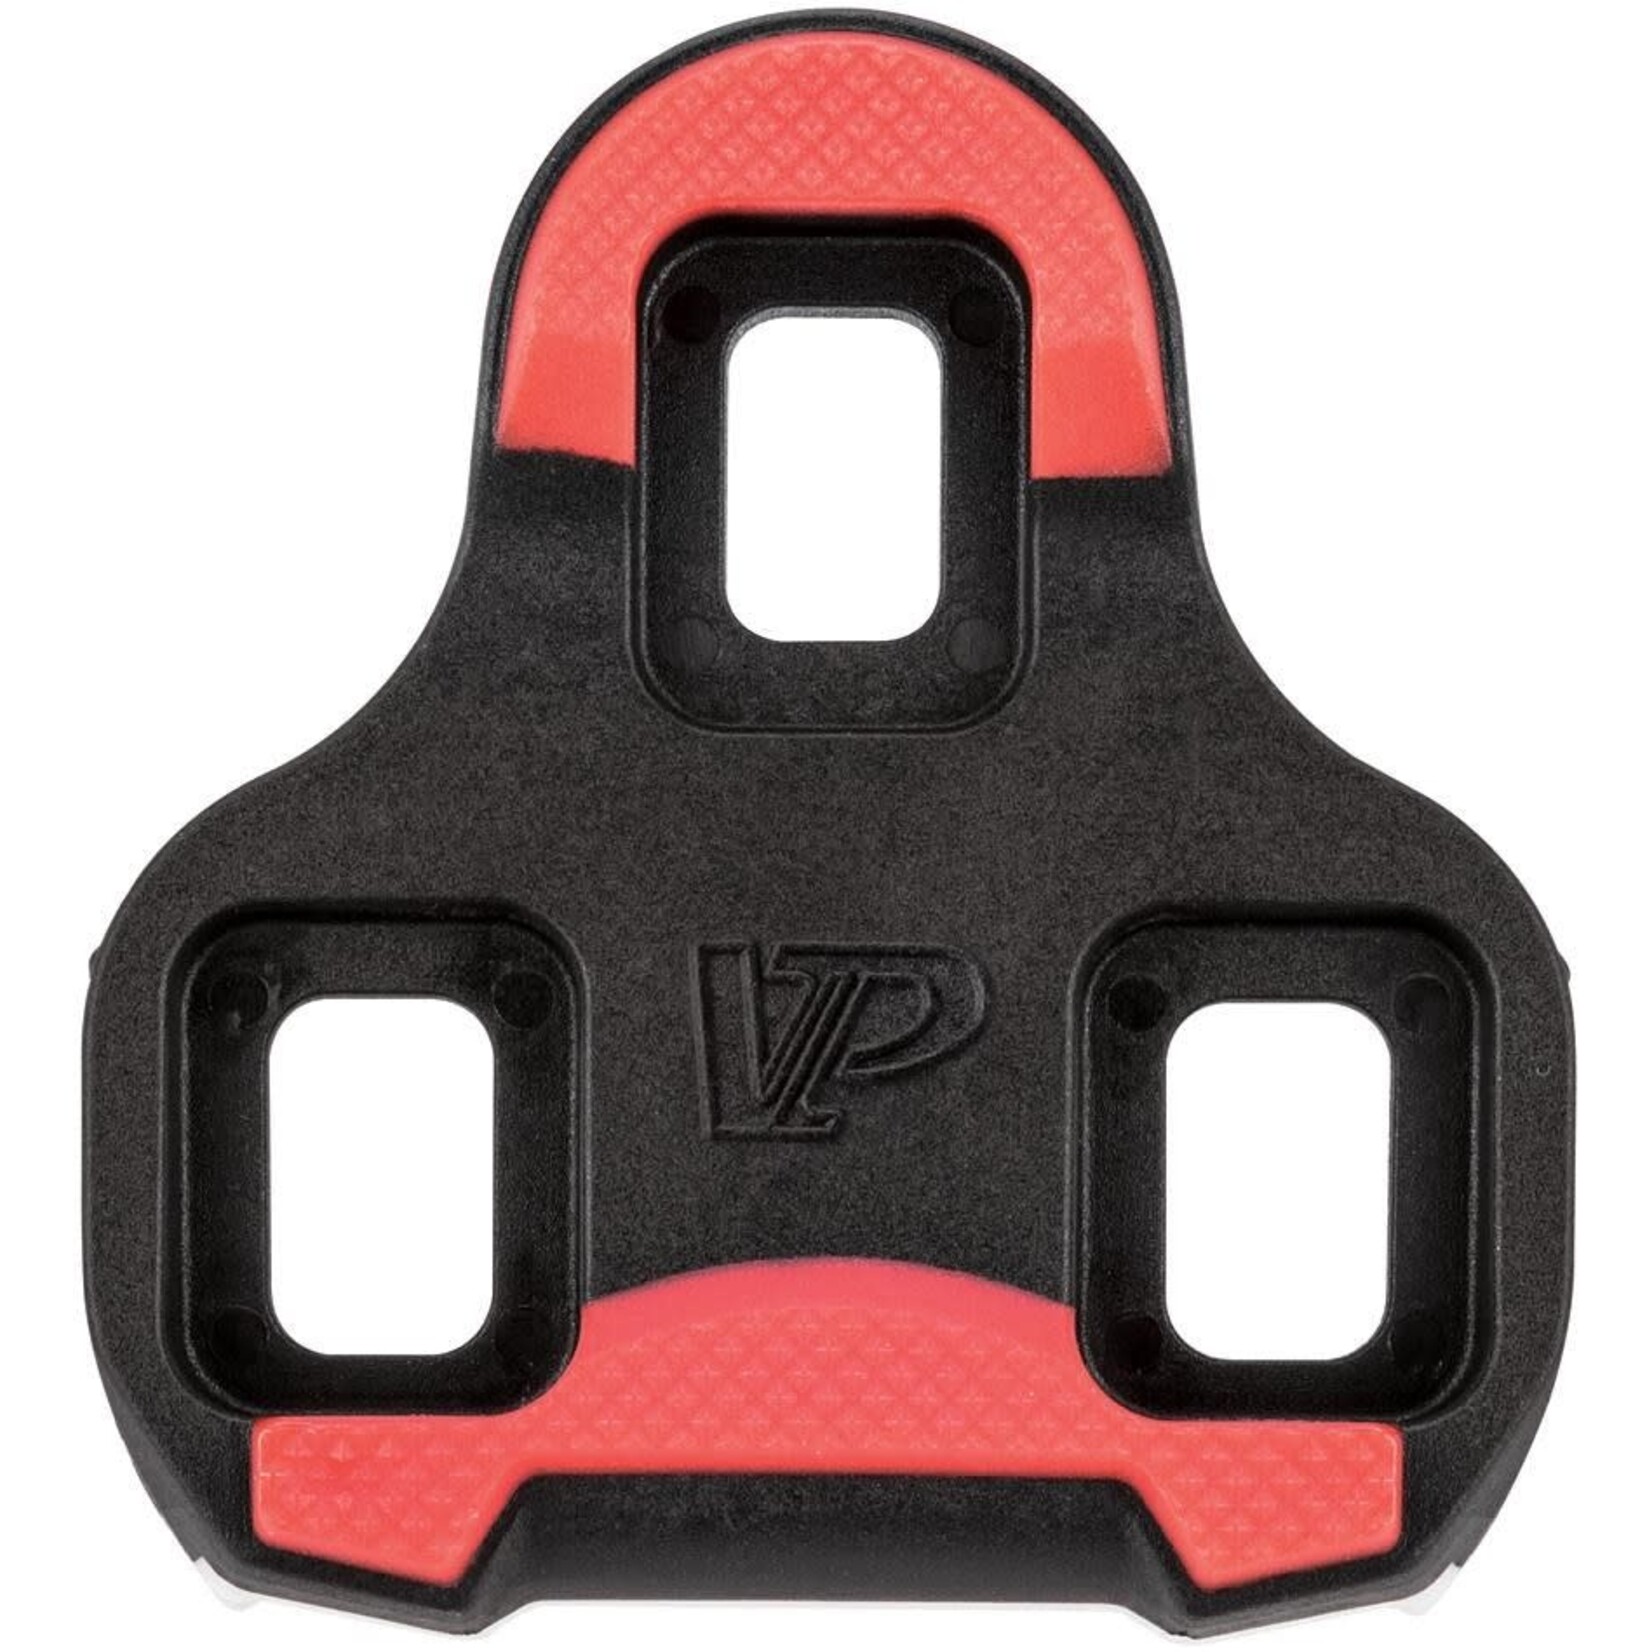 VP VP Components Perfect Placement Cleats KEO - Red 9deg